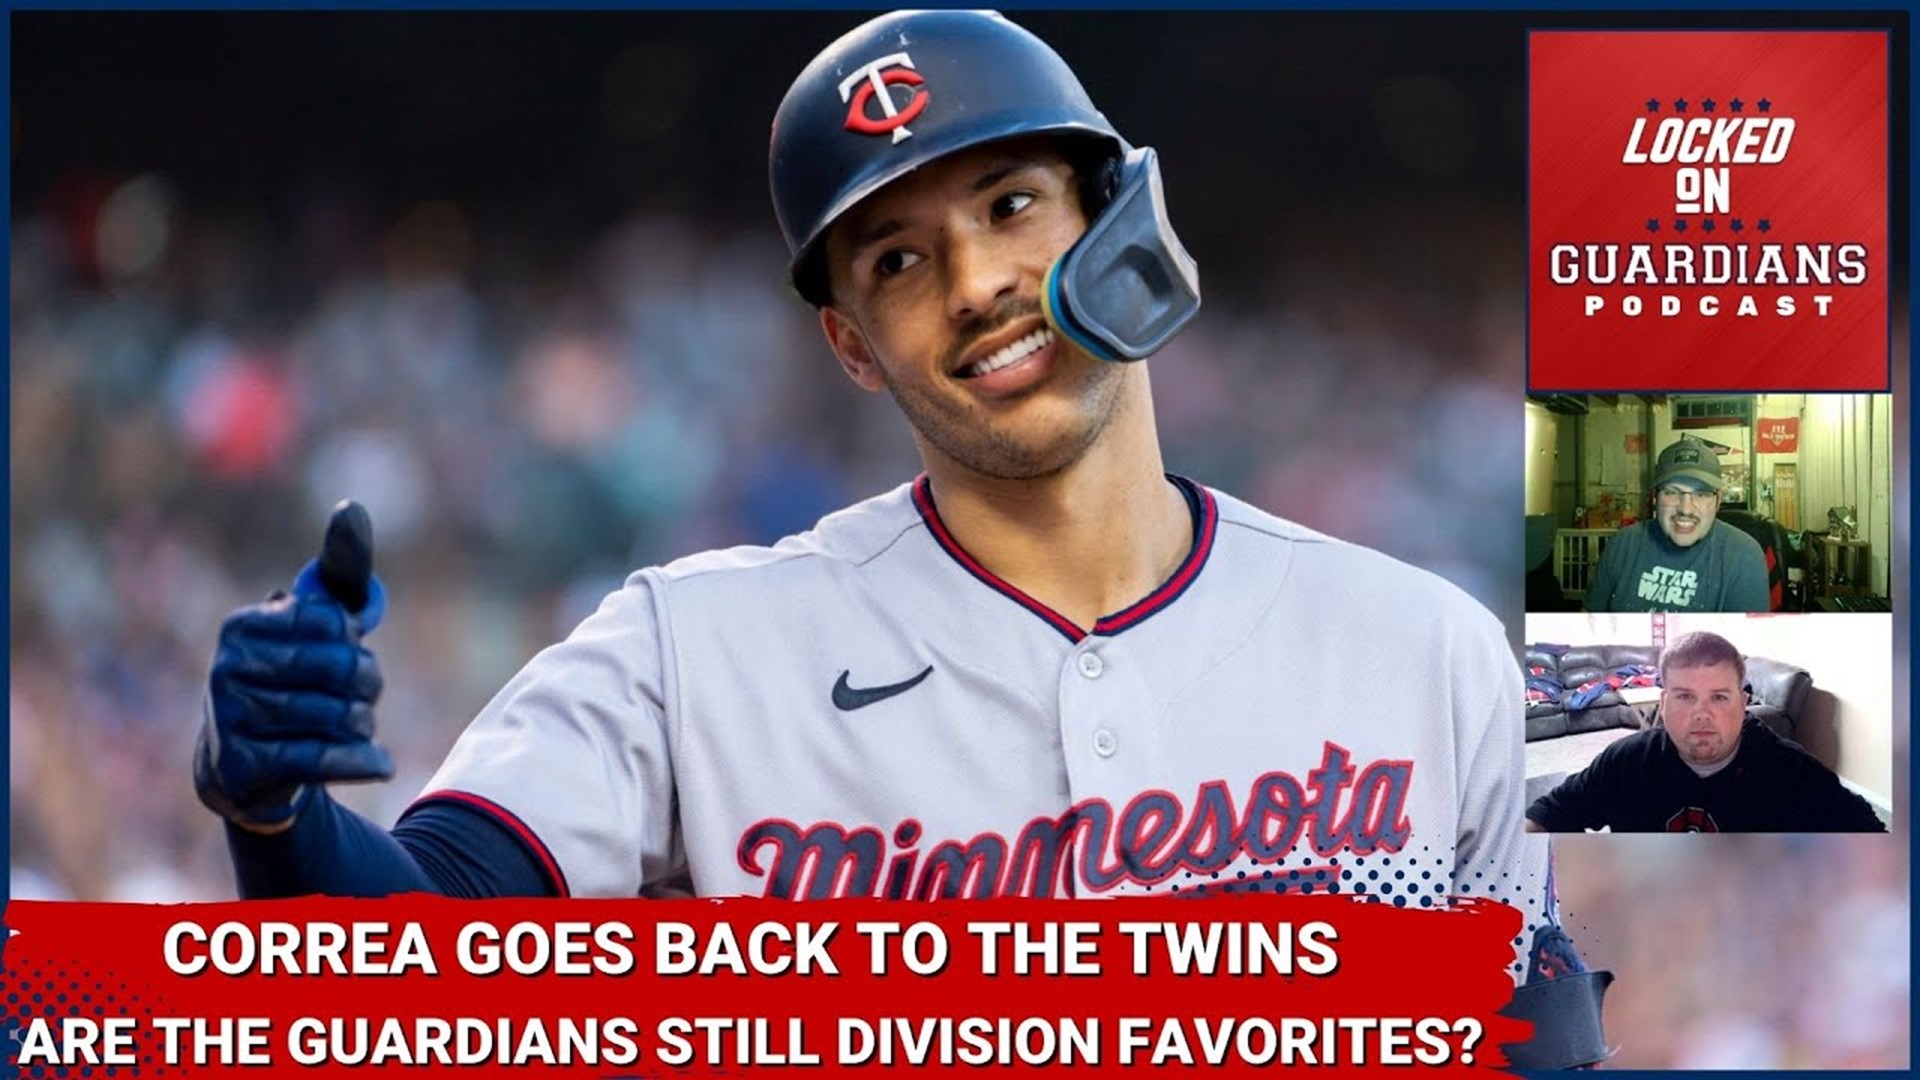 We get into the Carlos Correa situation and discuss what it means for the Guardians.